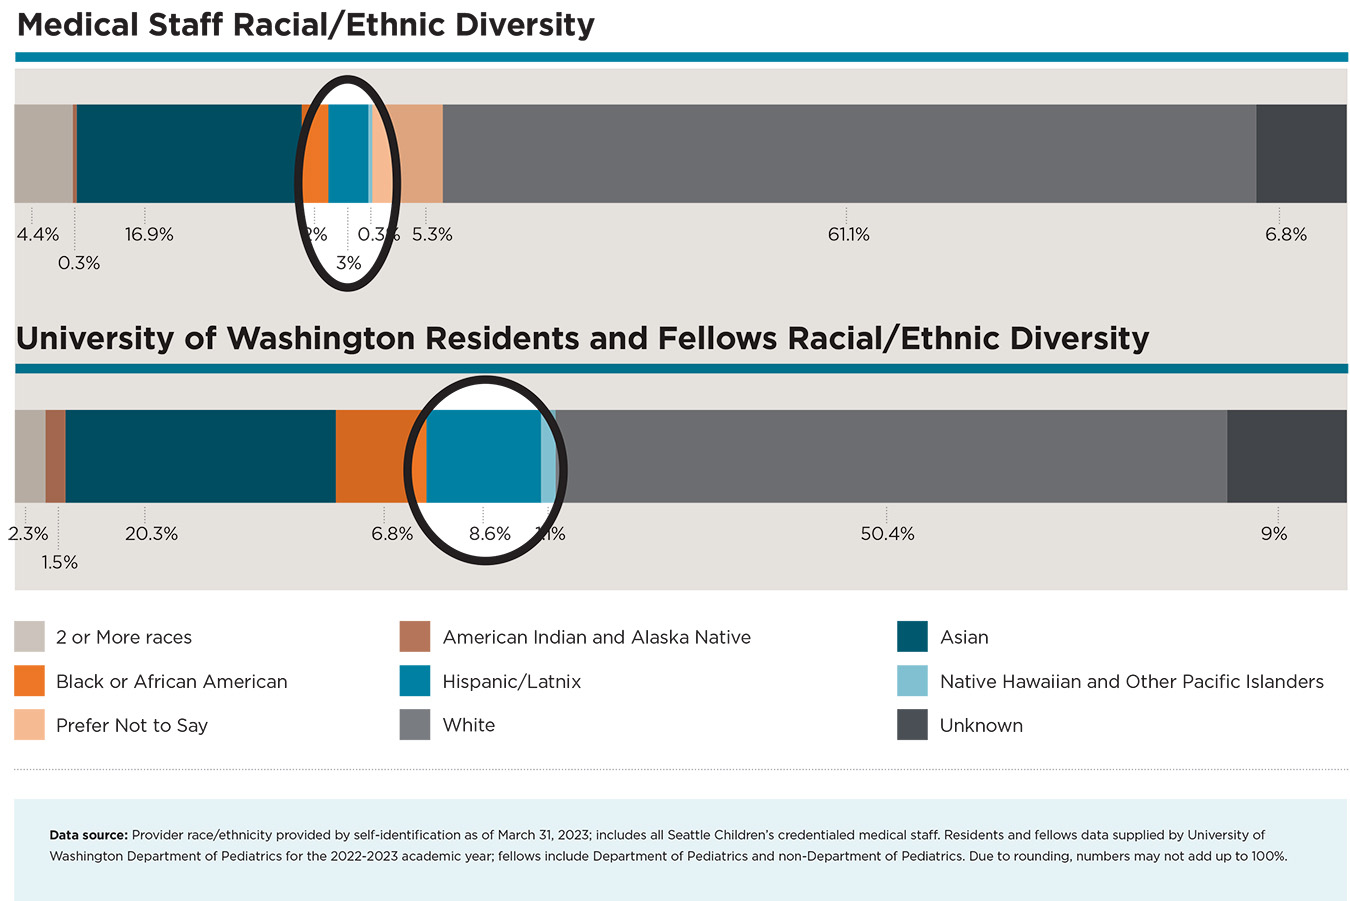 Medical Staff and UW Residents/Fellows Racial/Ethnic Diversity